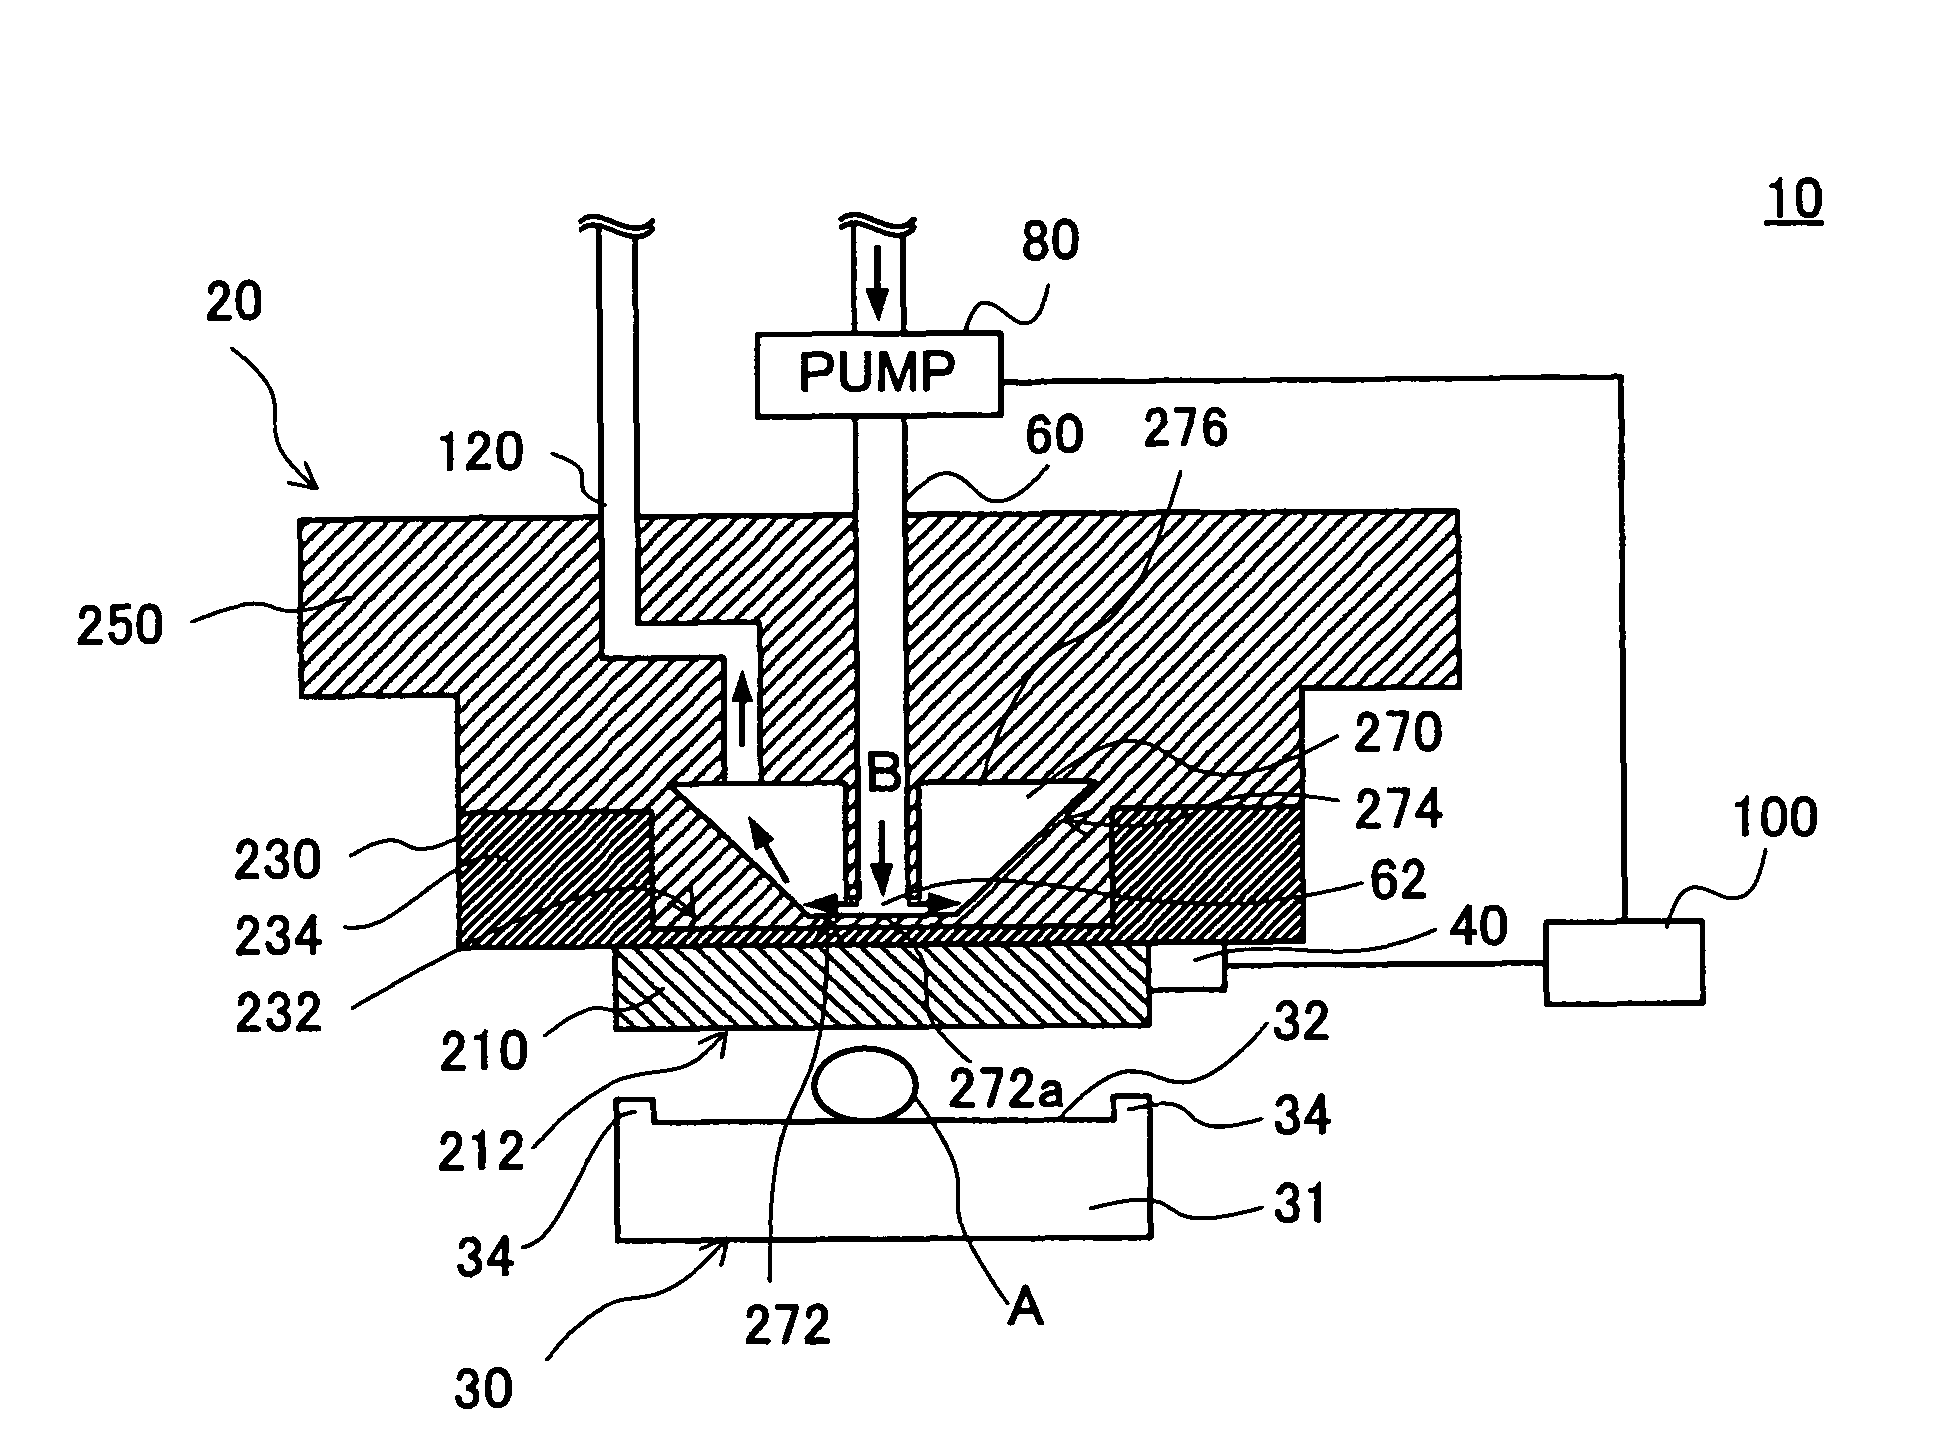 Glass forming apparatus and method